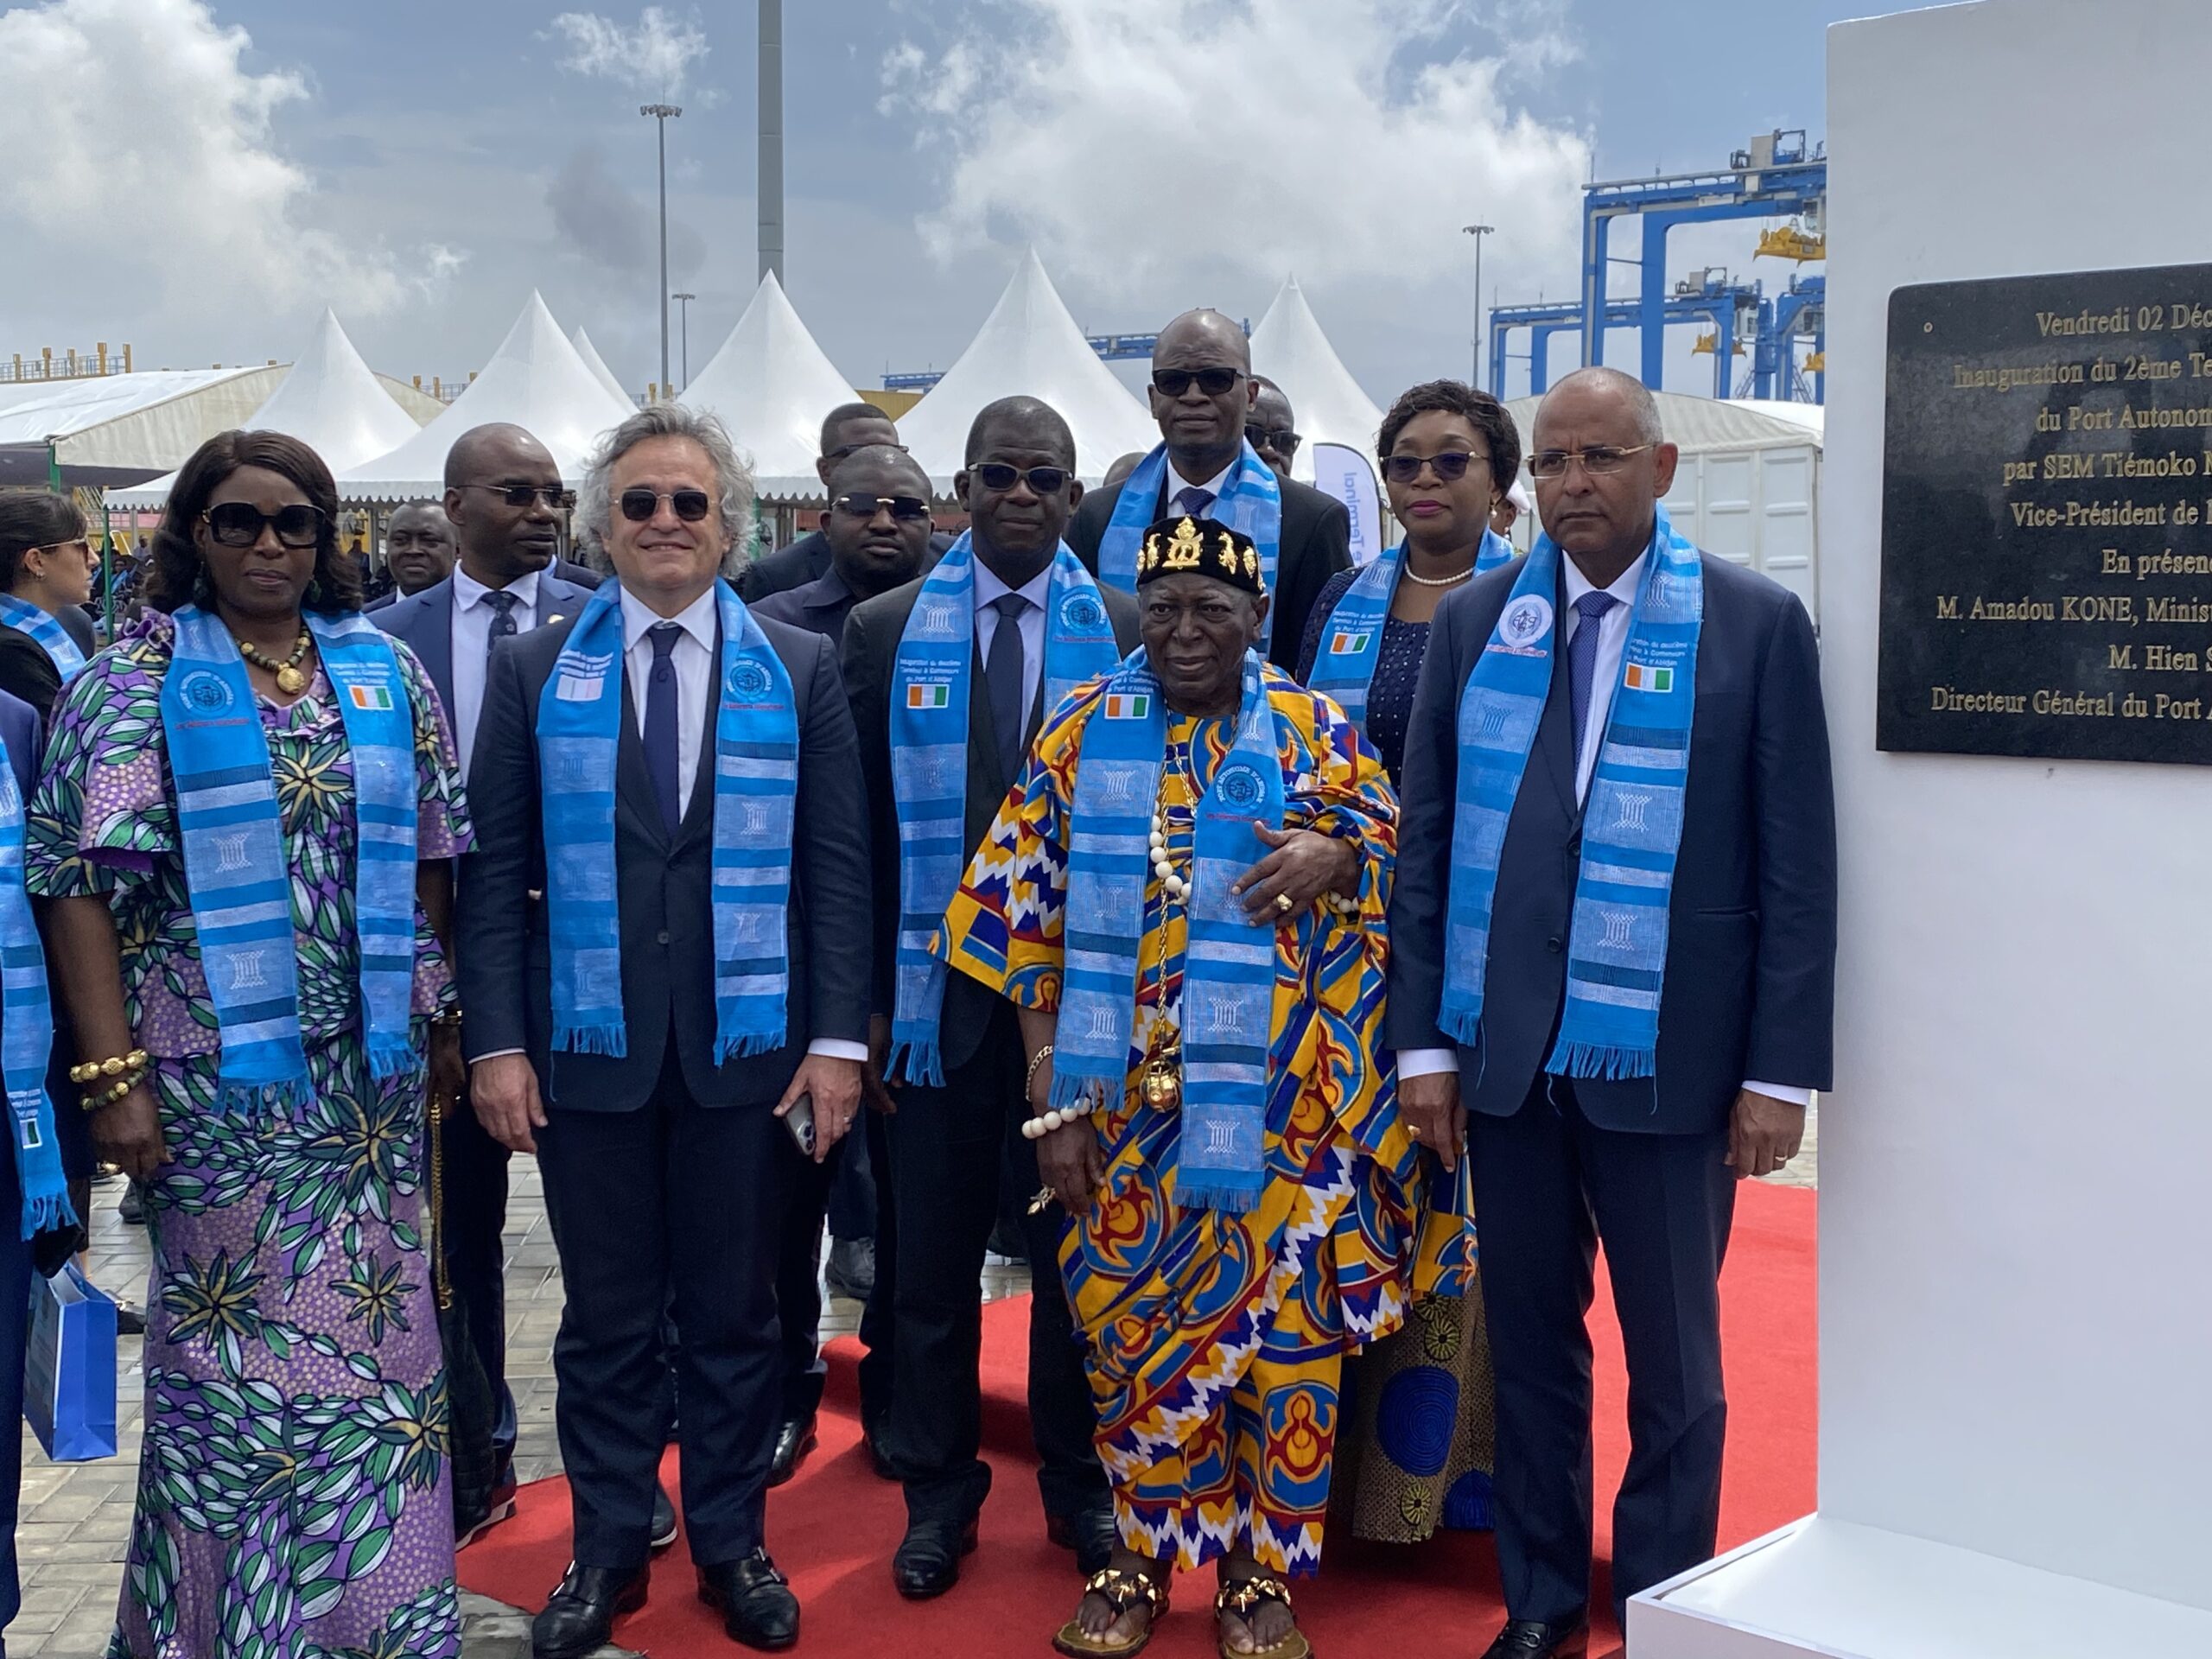 CÔTE D’IVOIRE TERMINAL OPENS A NEW CONTAINER TERMINAL TO MAKE THE PORT OF ABIDJAN THE MAIN PORT HUB IN WEST AFRICA